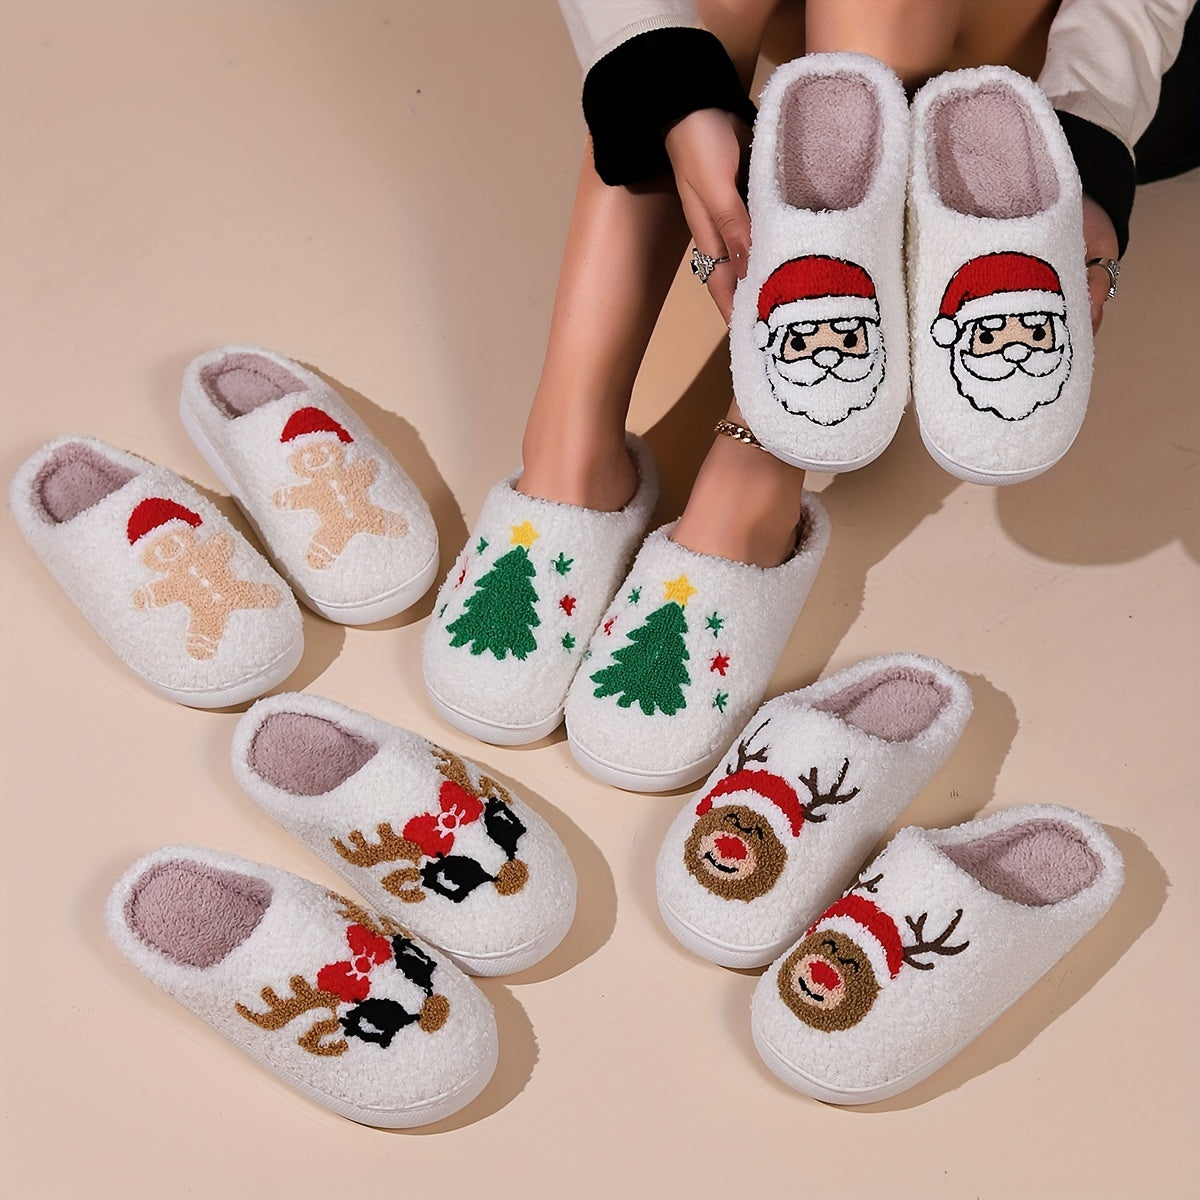 Christmas Tree Pattern Fuzzy Slippers, Winter Warm Closed Toe Flat Floor Shoes, Cozy Soft Sole Plush Home Slippers Ada Fashion